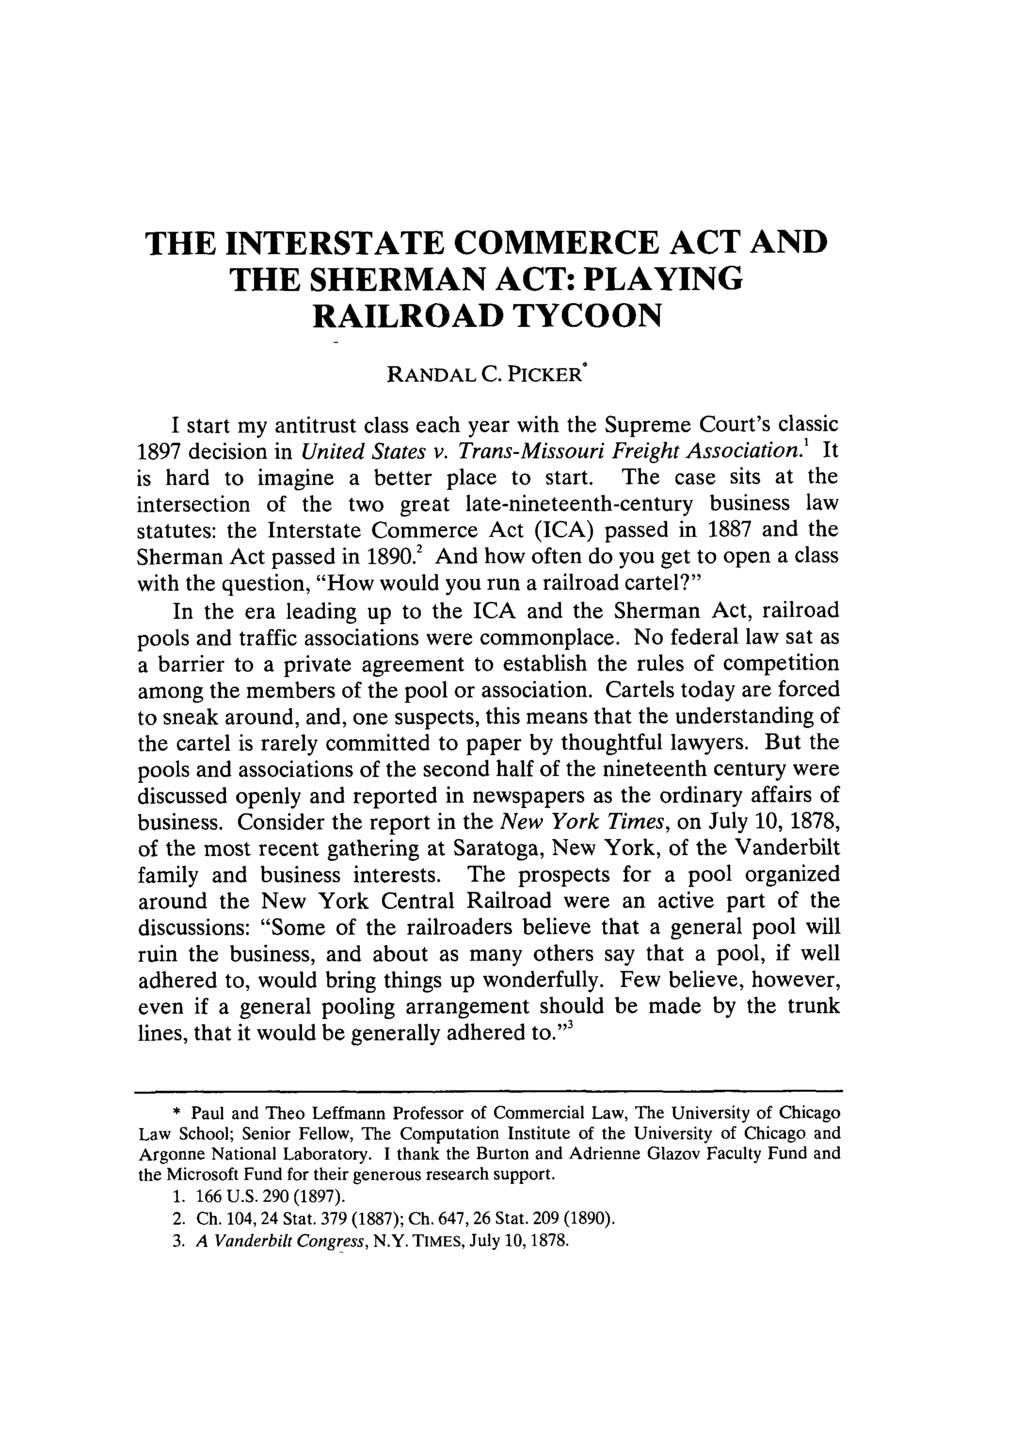 THE INTERSTATE COMMERCE ACT AND THE SHERMAN ACT: PLAYING RAILROAD TYCOON RANDAL C. PICKER I start my antitrust class each year with the Supreme Court's classic 1897 decision in United States v.